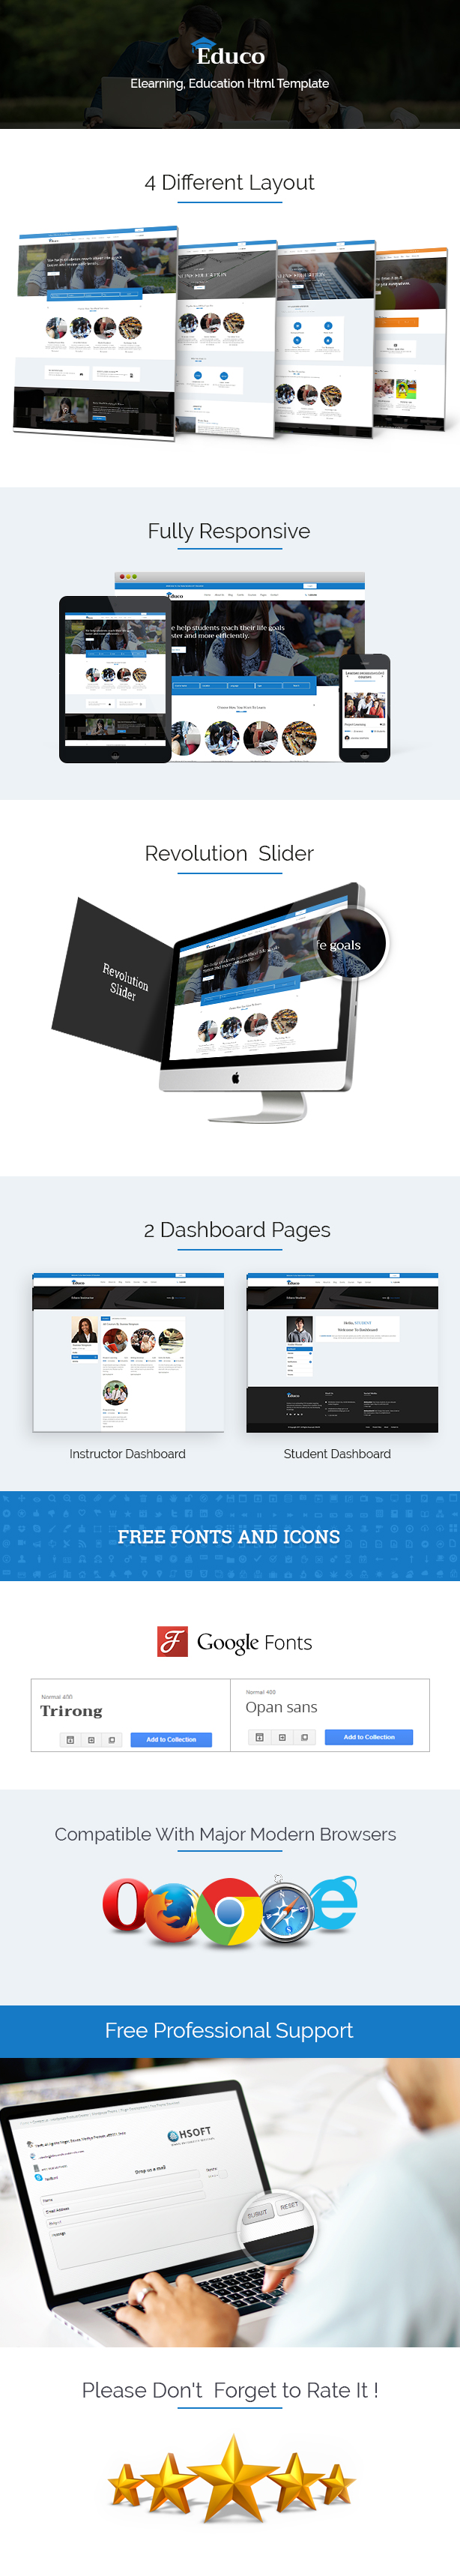 Education - eLearning Html Template - 9